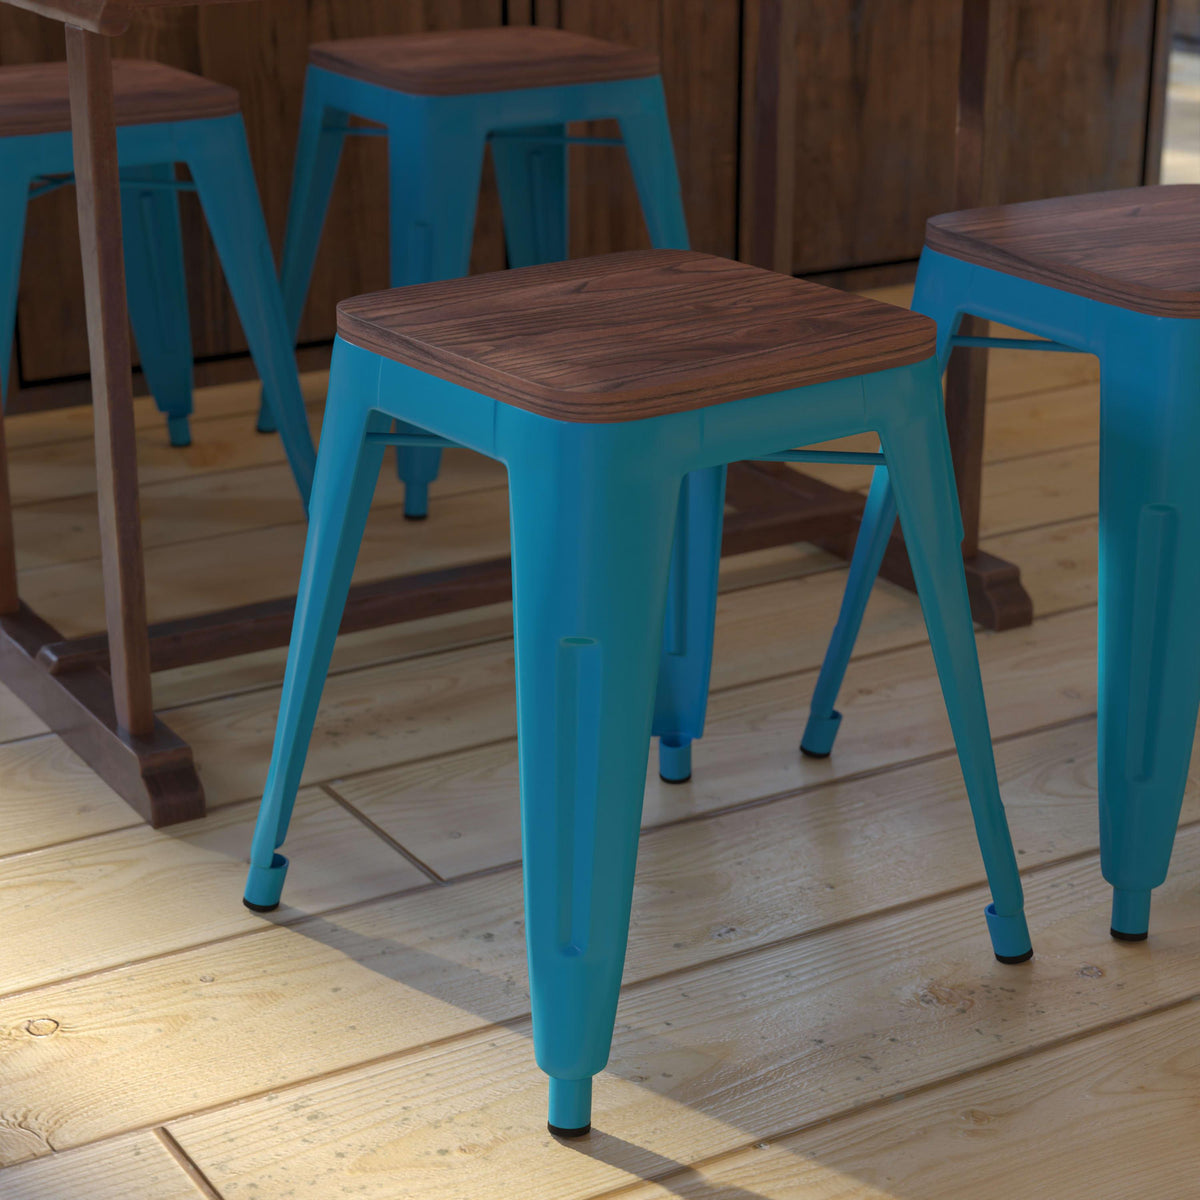 Teal |#| Set of 4 Teal 18inch Table Height Indoor Stackable Metal Stool with Wood Seat